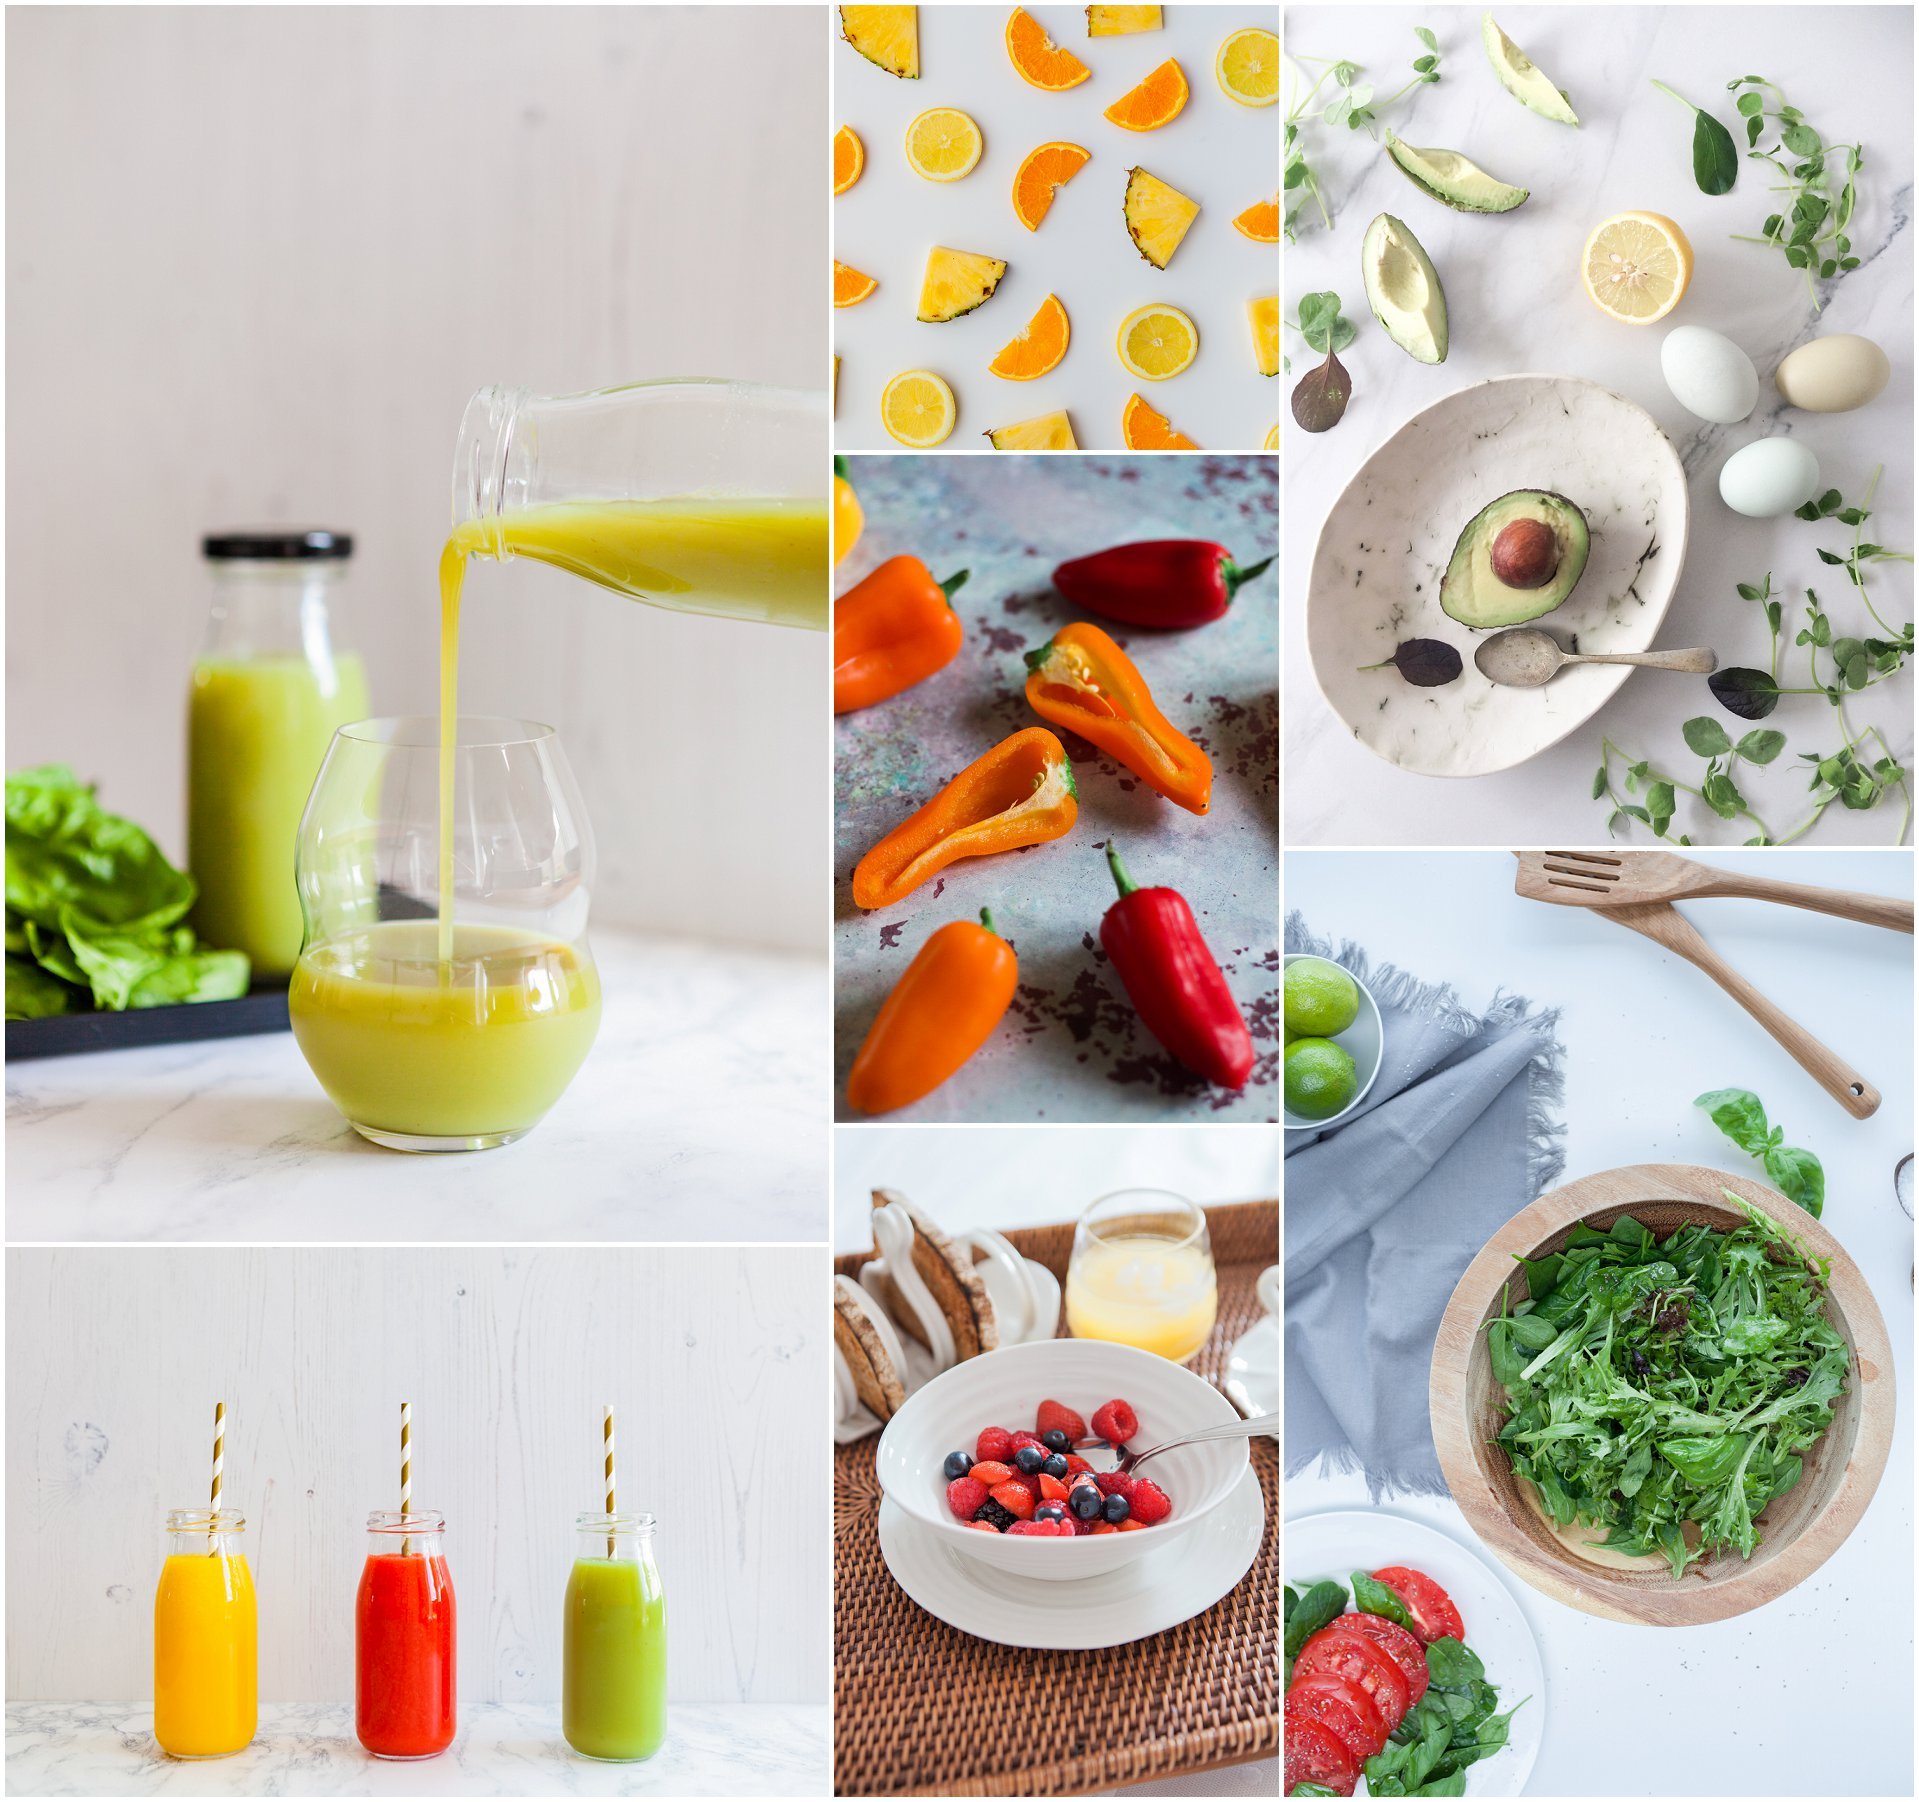 A selection of healthy food stock images by London stock photographer and brand photographer AKP Branding Stories - stock photography trends